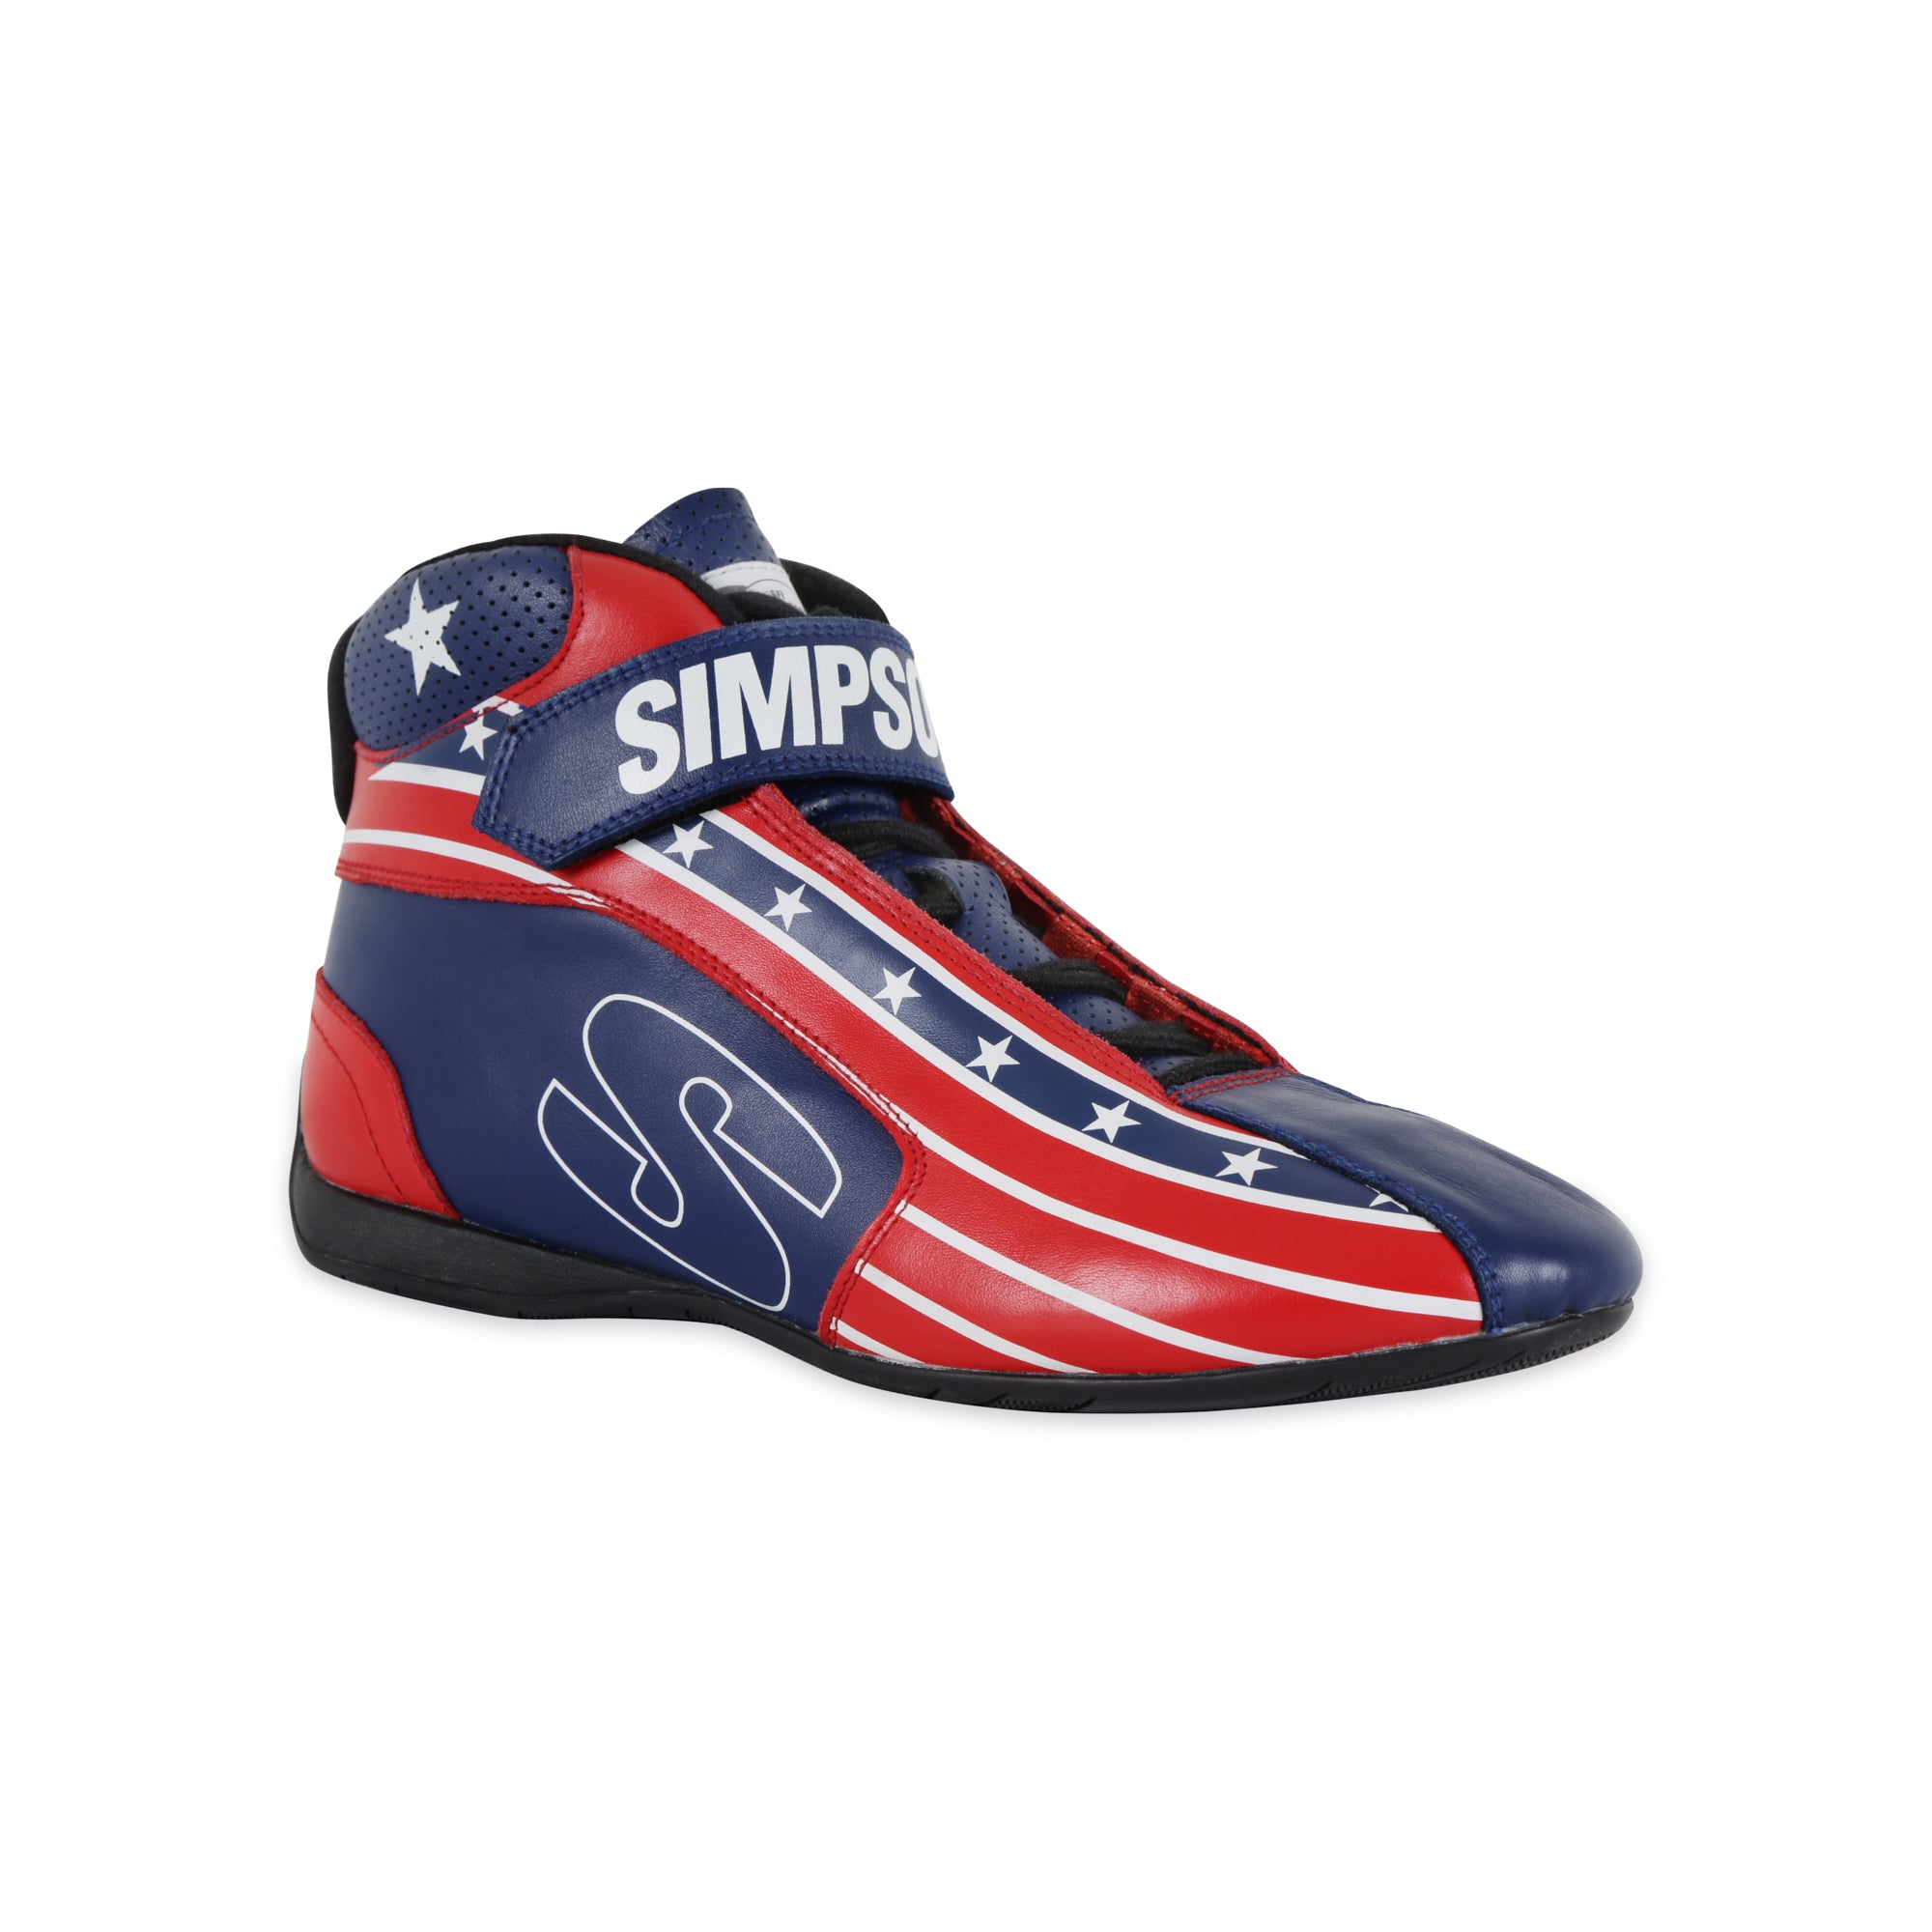 Simpson Shoe DNA X2 Patriot Size 9.5 Safety Clothing Driving Shoes and Boots main image